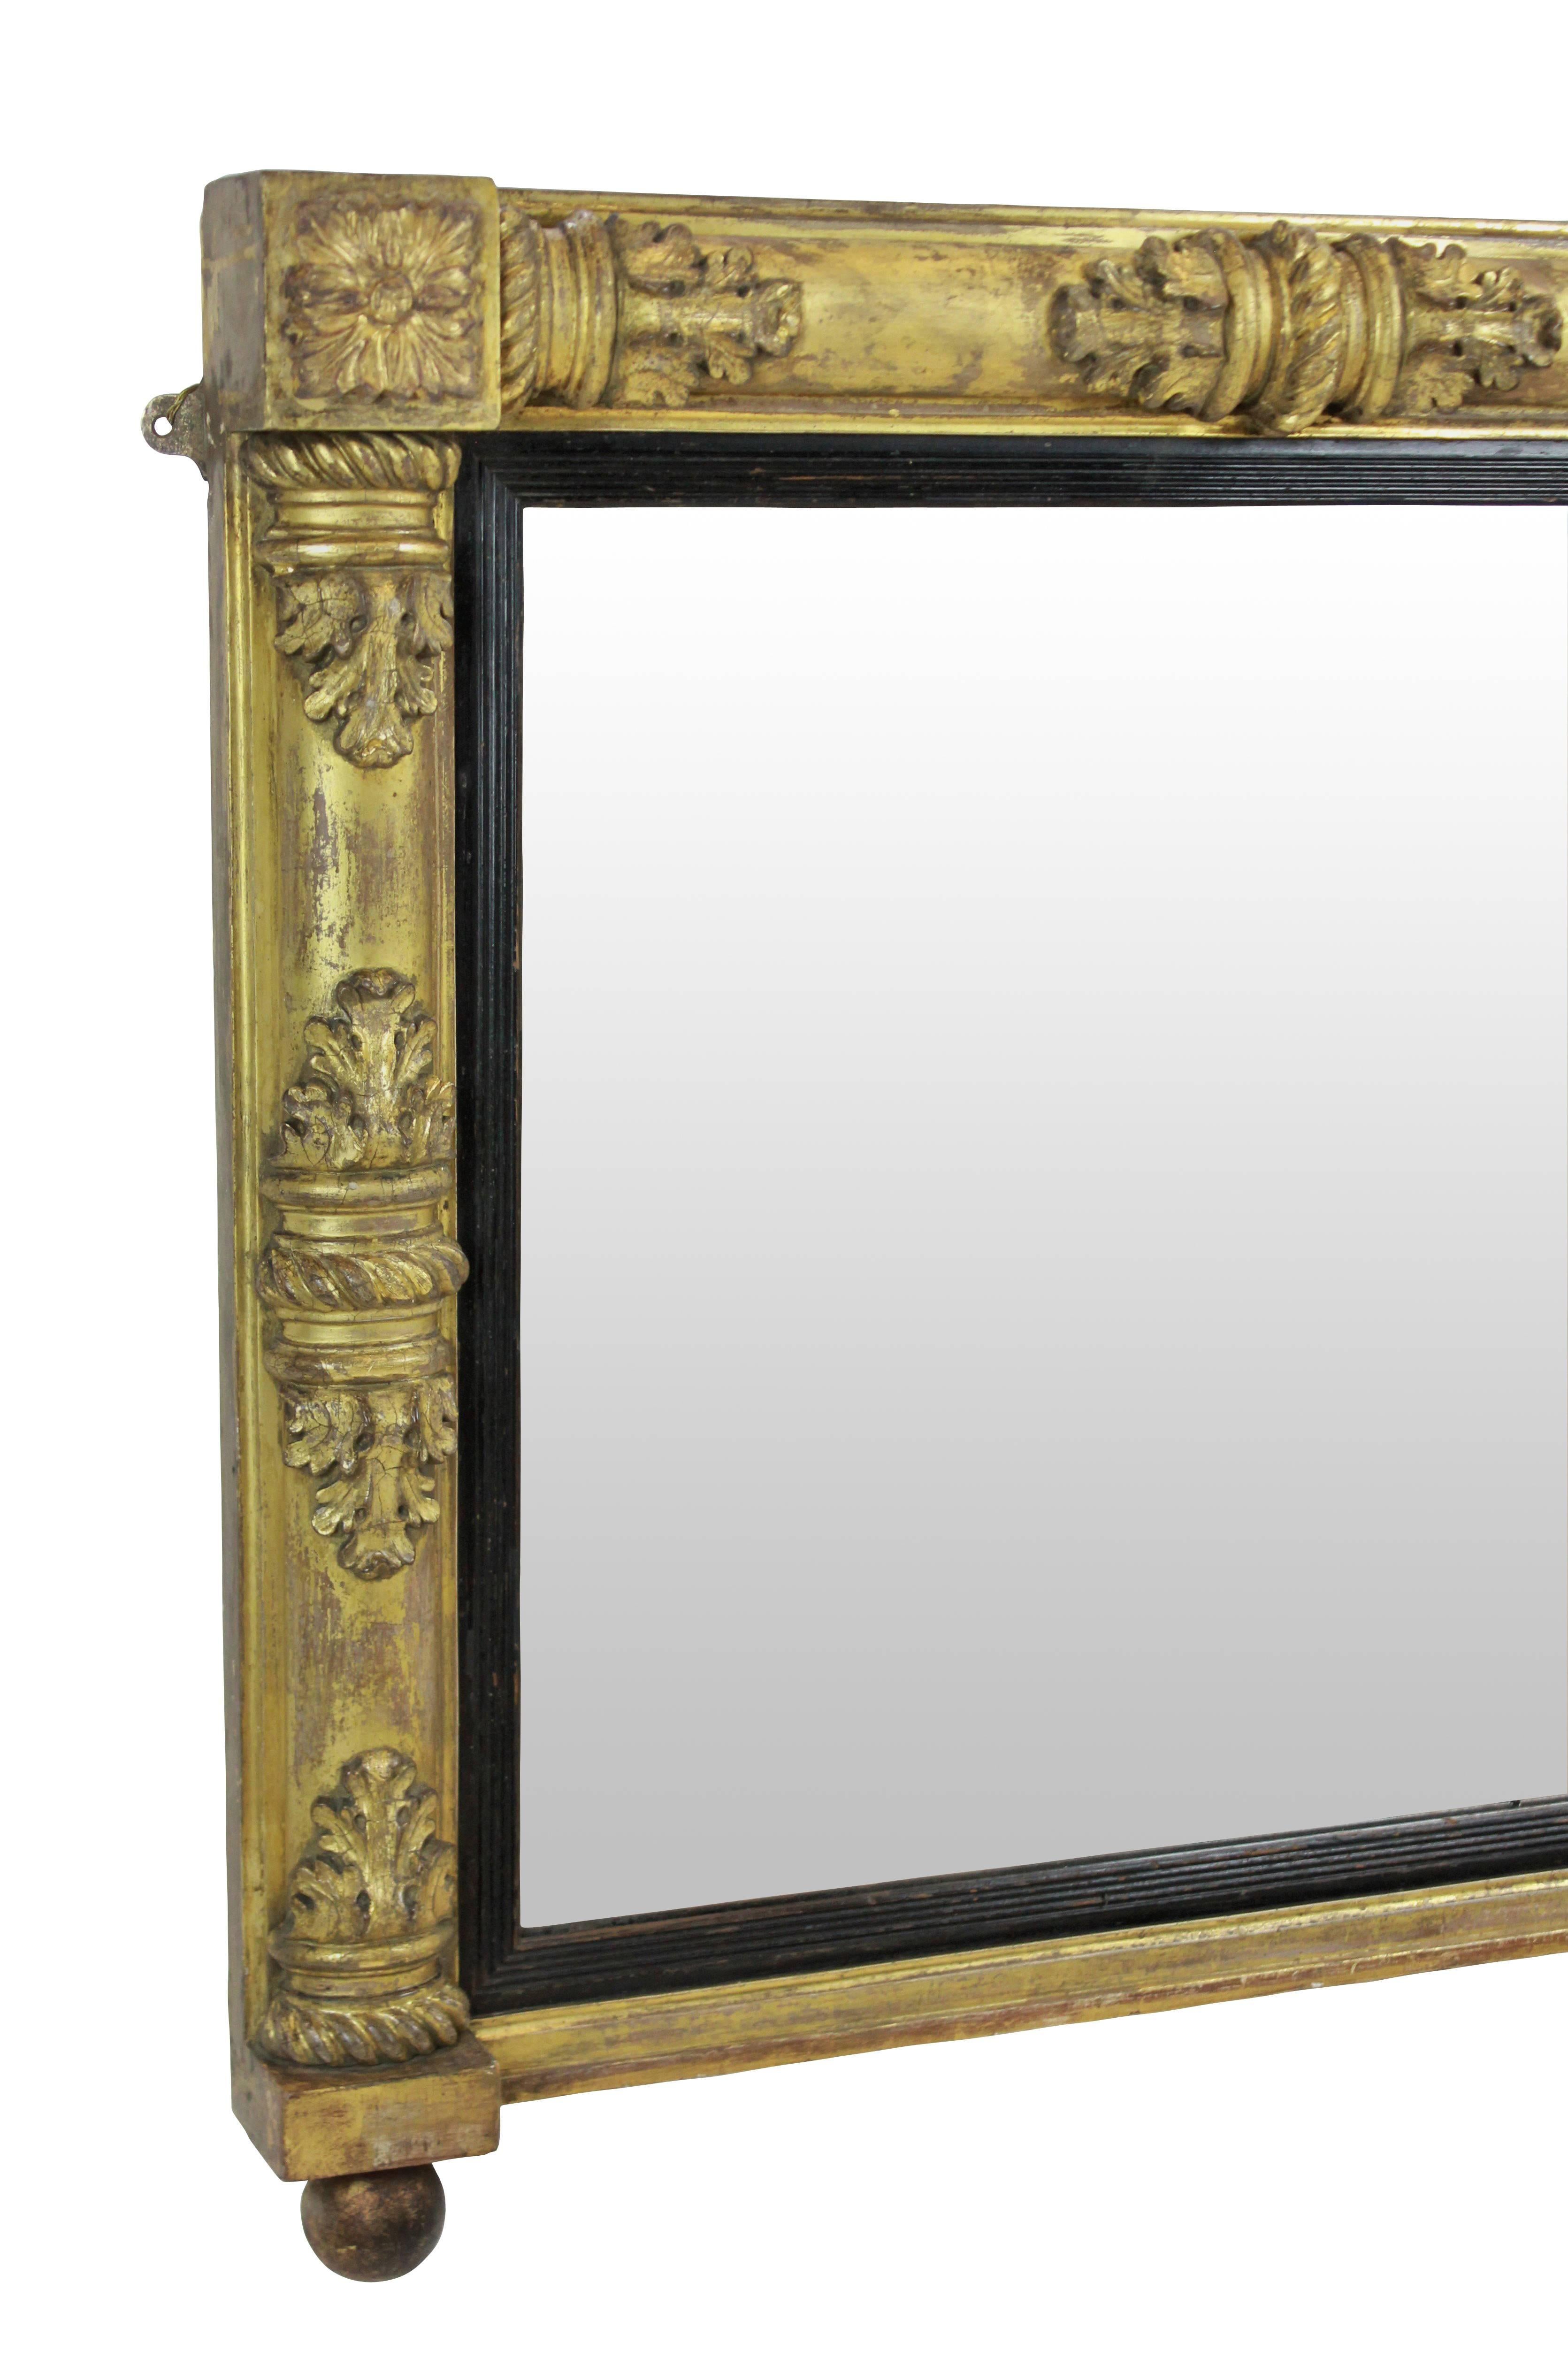 A finely carved and water gilded William IV overmantel mirror, with ebonized slips, mercury plate and depicting acanthus leaves.